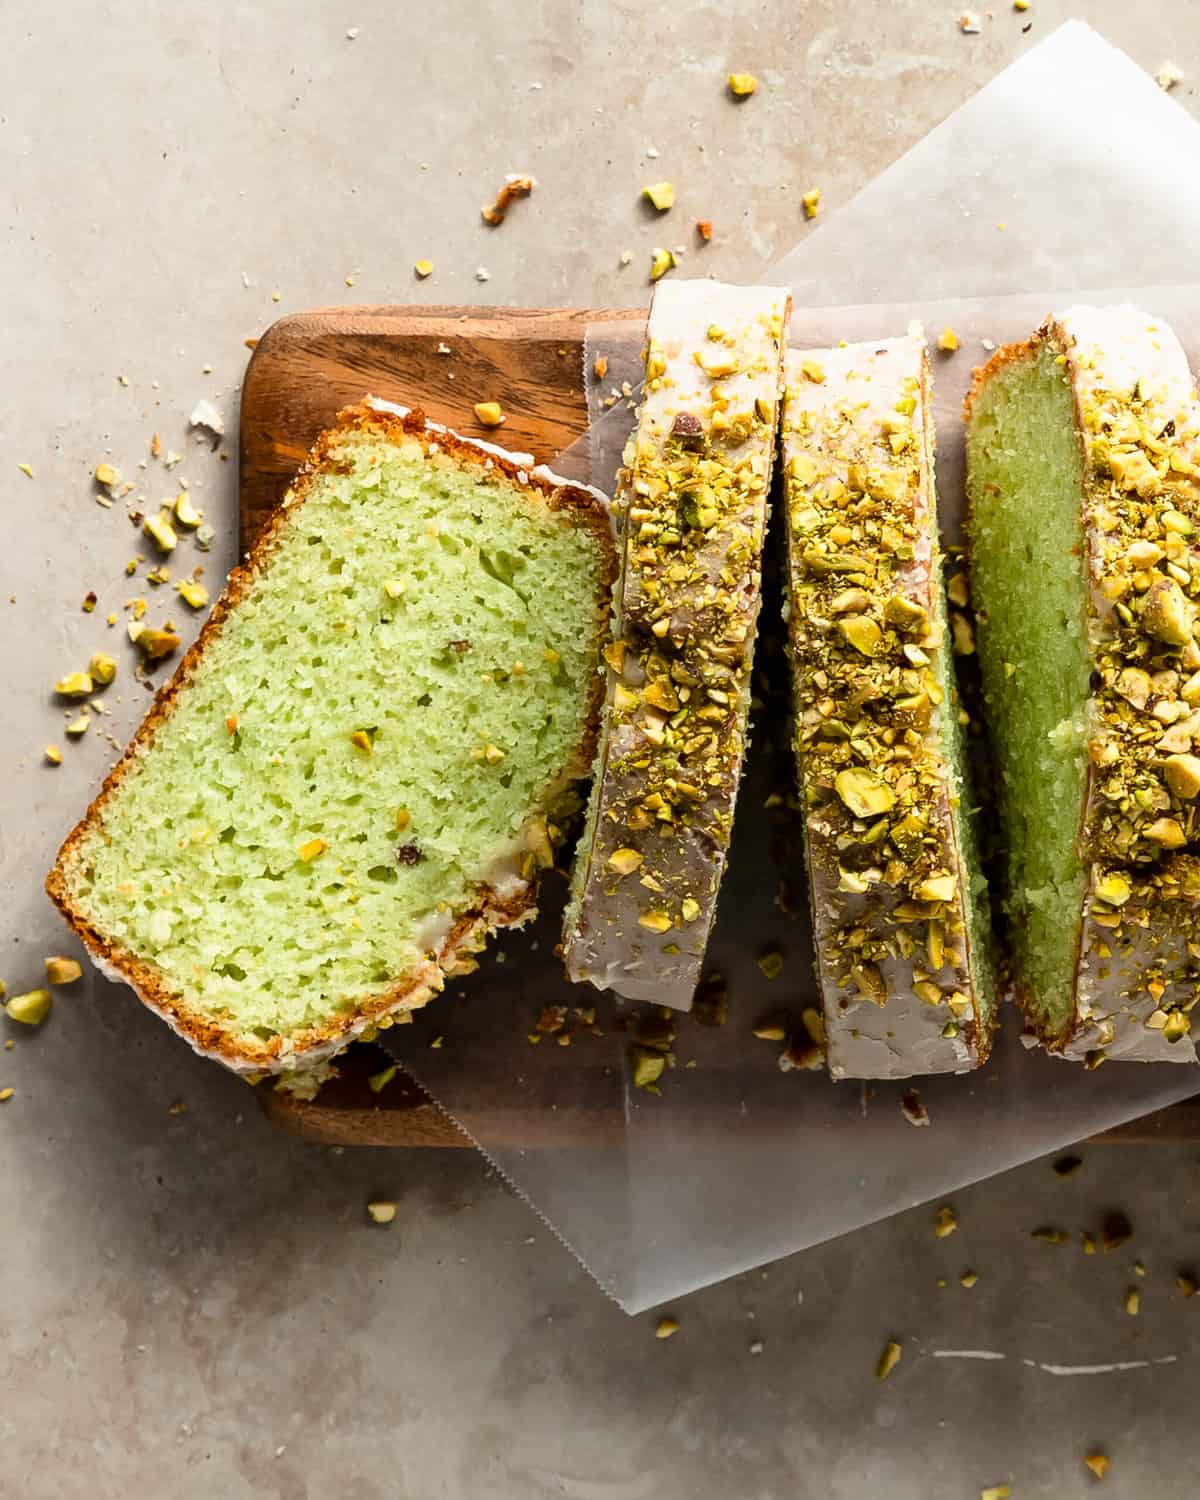 Pistachio bread is sweet, soft and moist pistachio quick bread made with pistachio pudding mix. Top this easy to make pistachio loaf with a nutty almond and vanilla glaze and real pistachios for a delightfully festive, sweet and salty treat.